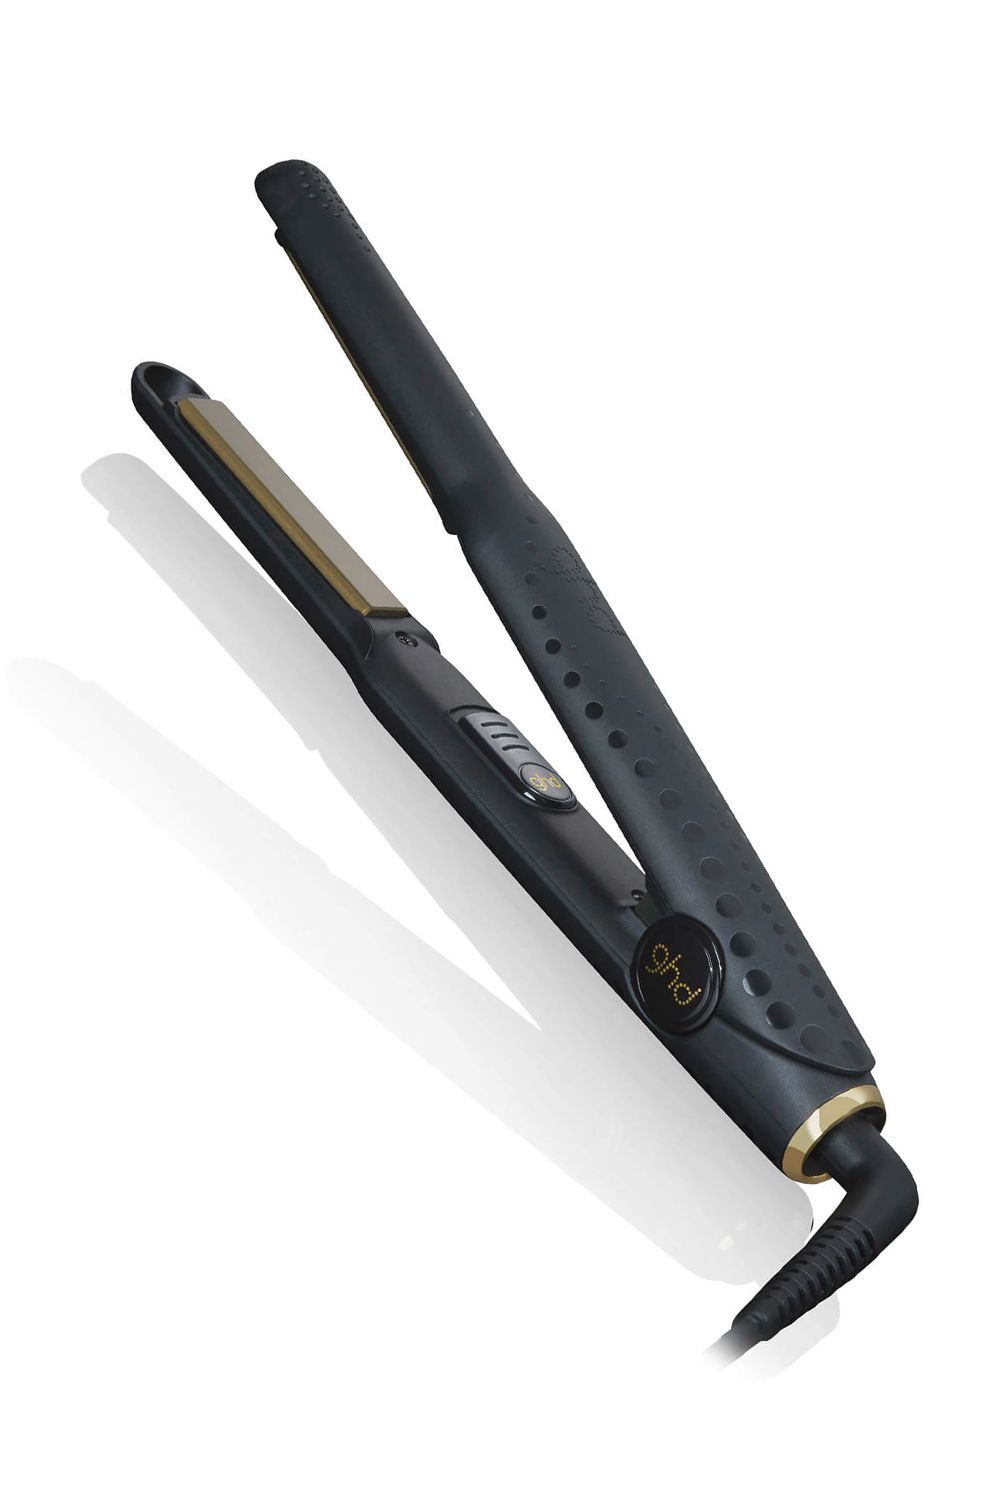 10 Best Mini Flatirons and Hair Straighteners of 2022 for Travel